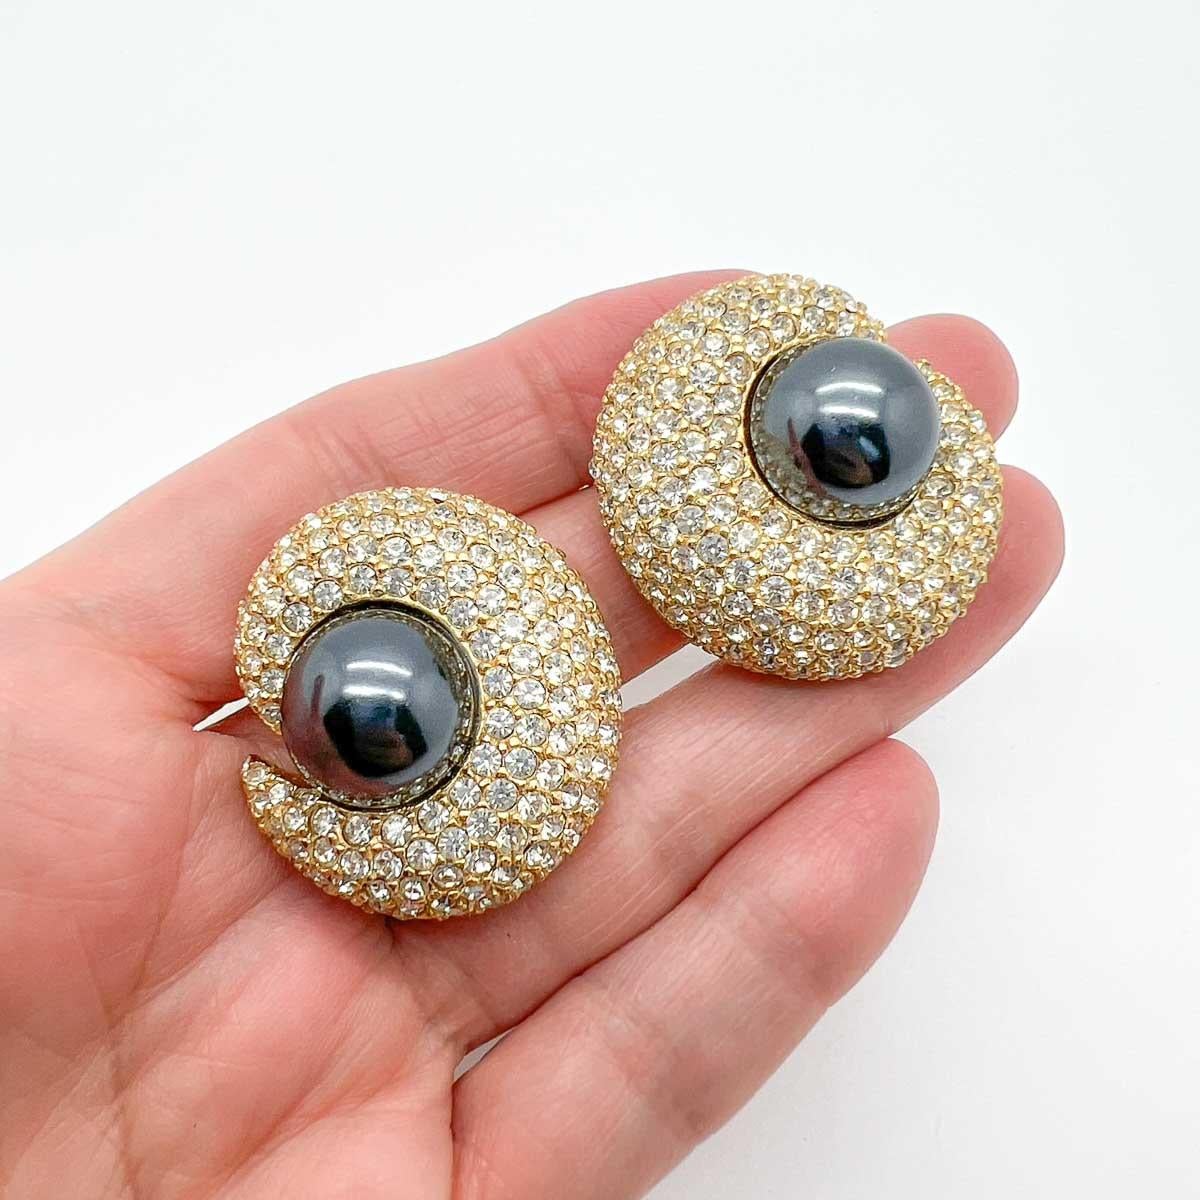 Vintage Ciner Pearl Crescent Earrings. Featuring a wonderfully opulent grey pearl amidst a crystal crescent.
Since 1982, New York City based costume jewellery company CINER have designed and manufactured jewellery. Turning from fine jewellery